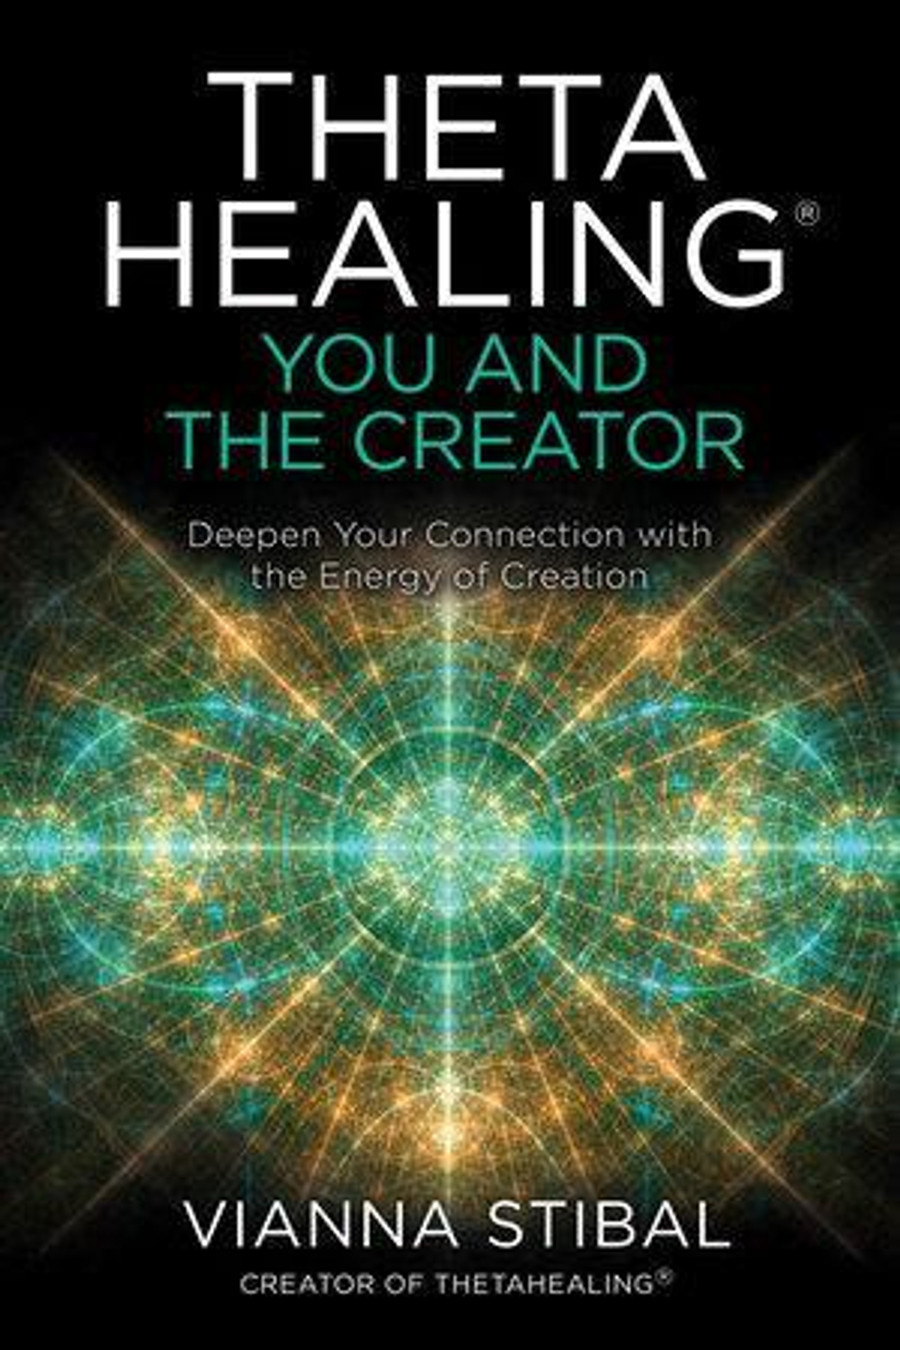 ThetaHealing®: You and the Creator by Vianna Stibal